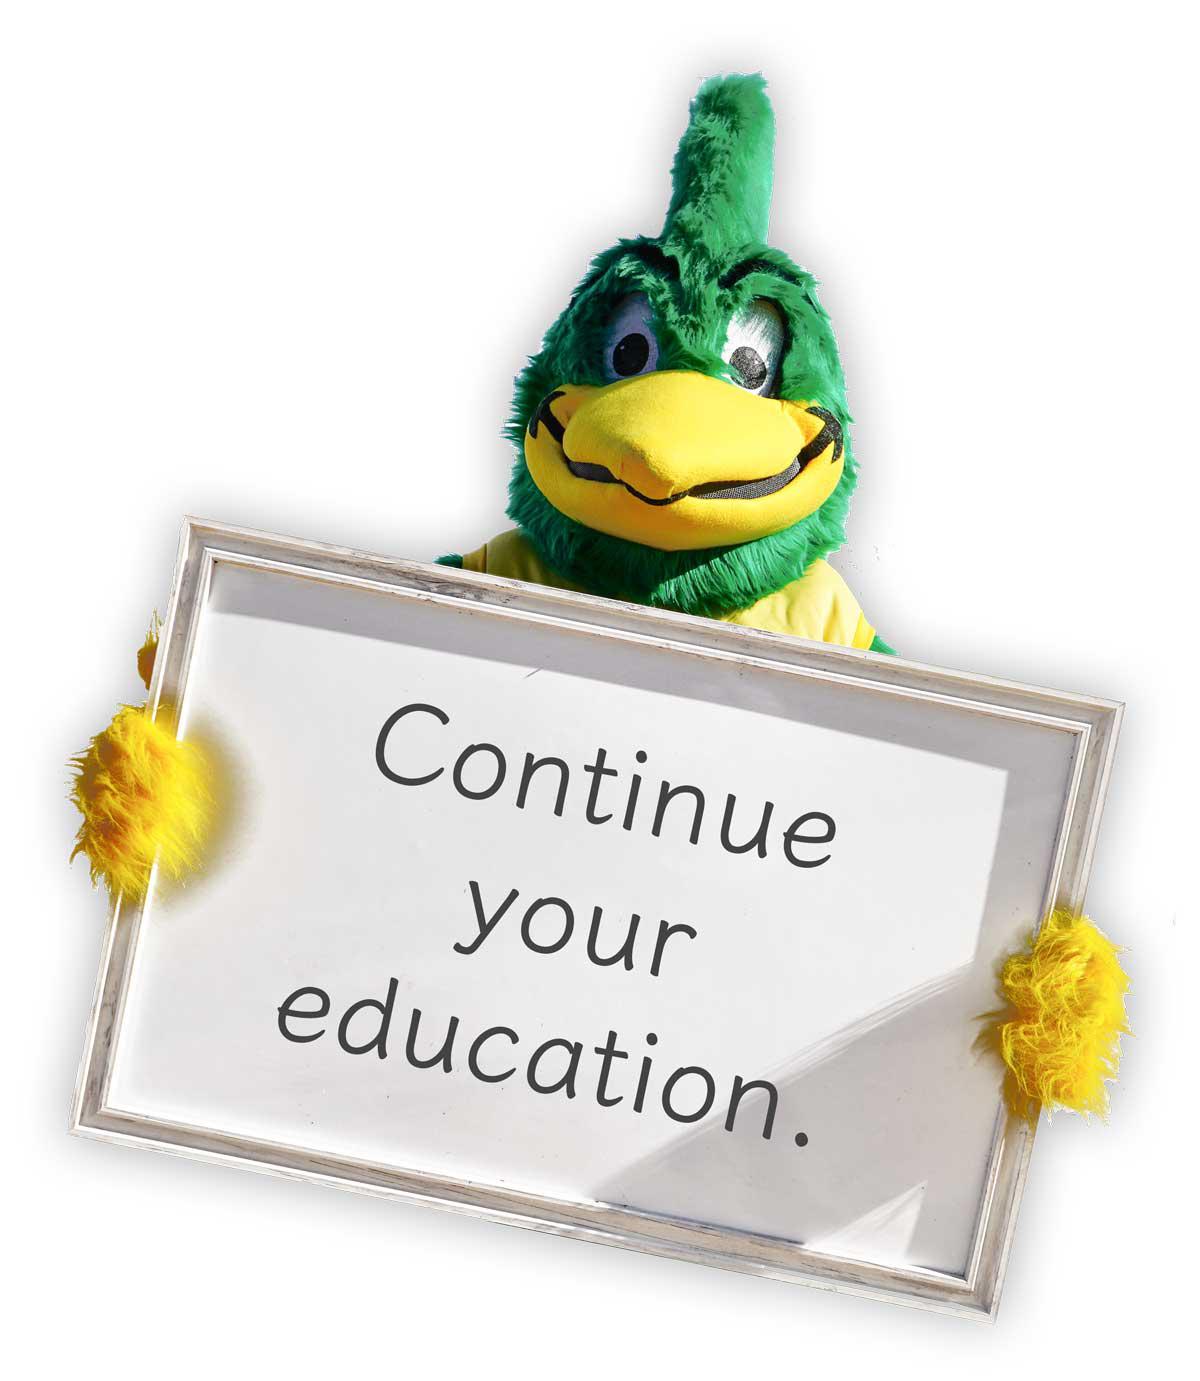 Continue your education.